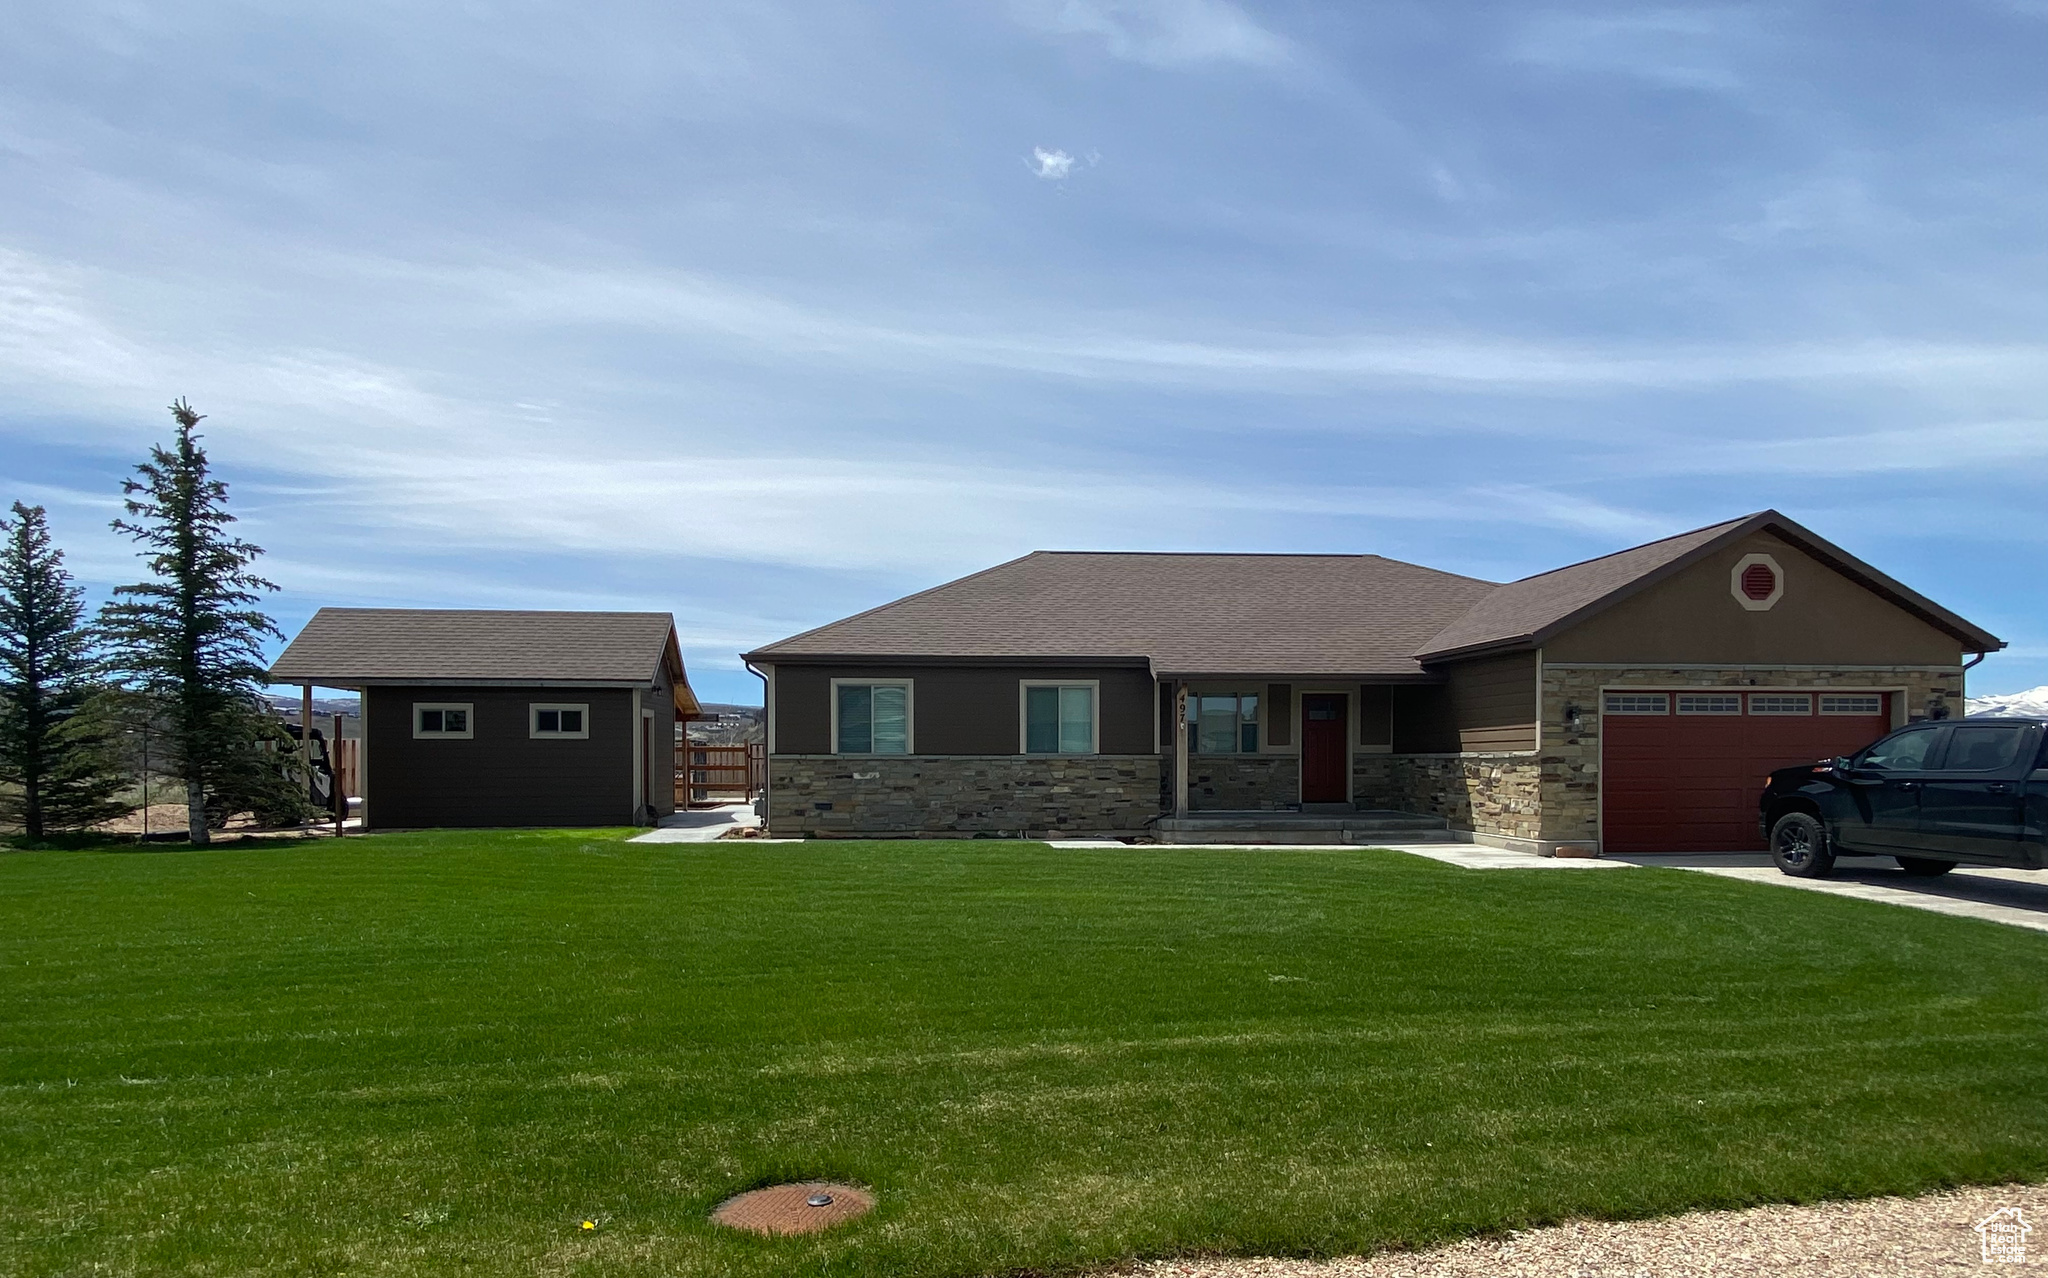 497 RIVER BLUFFS, Francis, Utah 84036, 4 Bedrooms Bedrooms, 11 Rooms Rooms,2 BathroomsBathrooms,Residential,For sale,RIVER BLUFFS,1996102